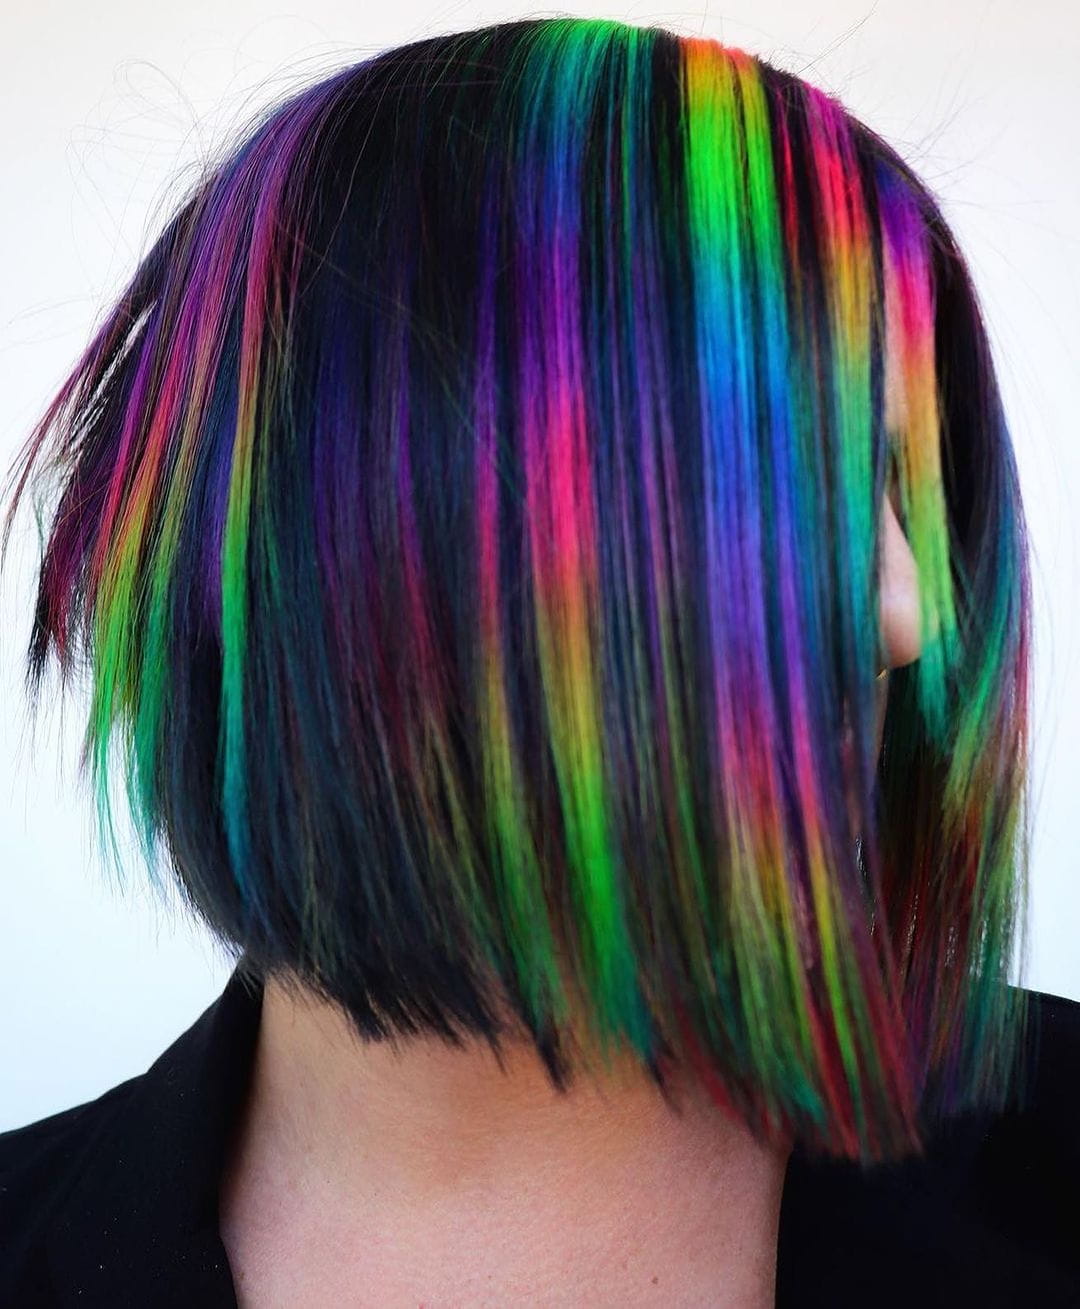 100+ Best Colorful Hair Ideas images 56